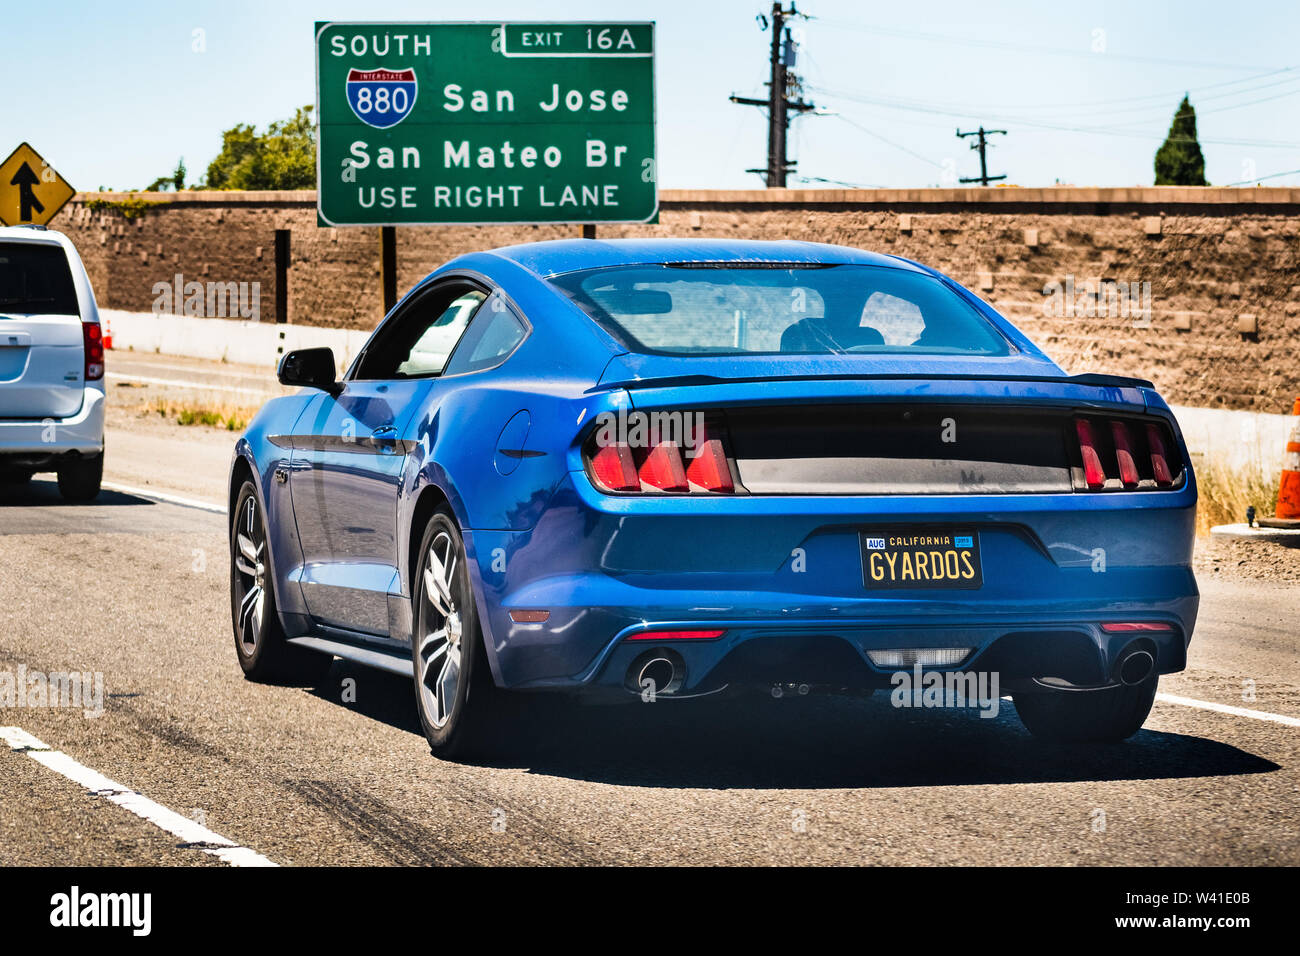 July 13, 2019 Berkeley / CA / USA - White Ford GT Mustang travelling on 880 Freeway in East San Francisco bay area; rear view Stock Photo